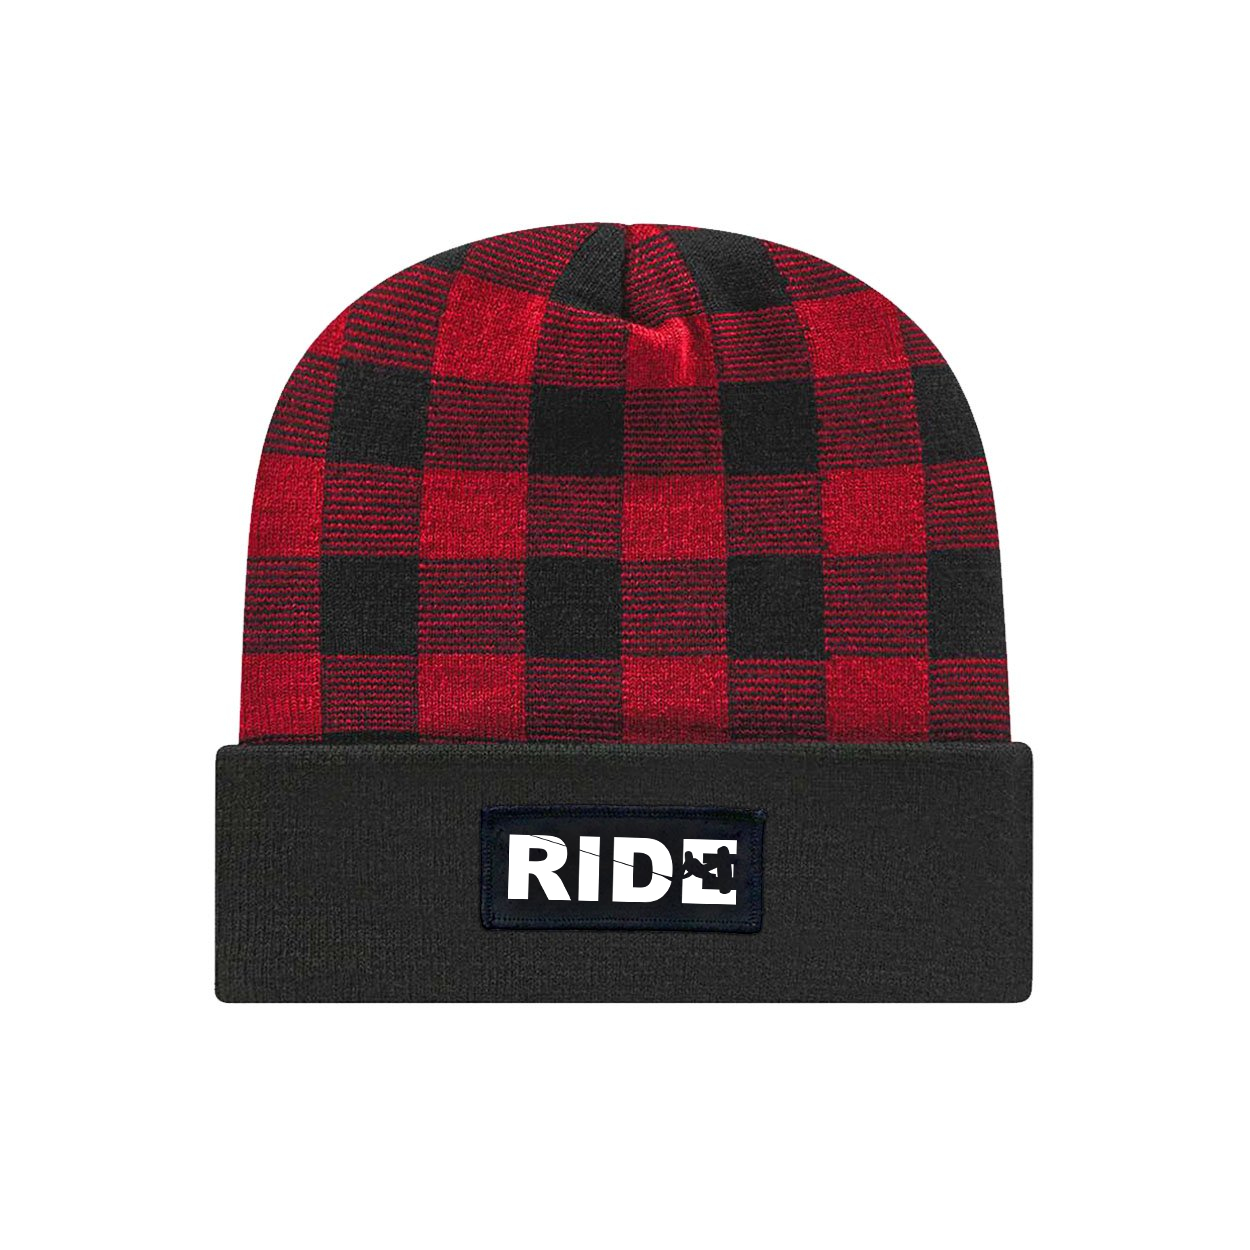 Ride Wakeboard Logo Night Out Woven Patch Roll Up Plaid Beanie Black/True Red (White Logo)